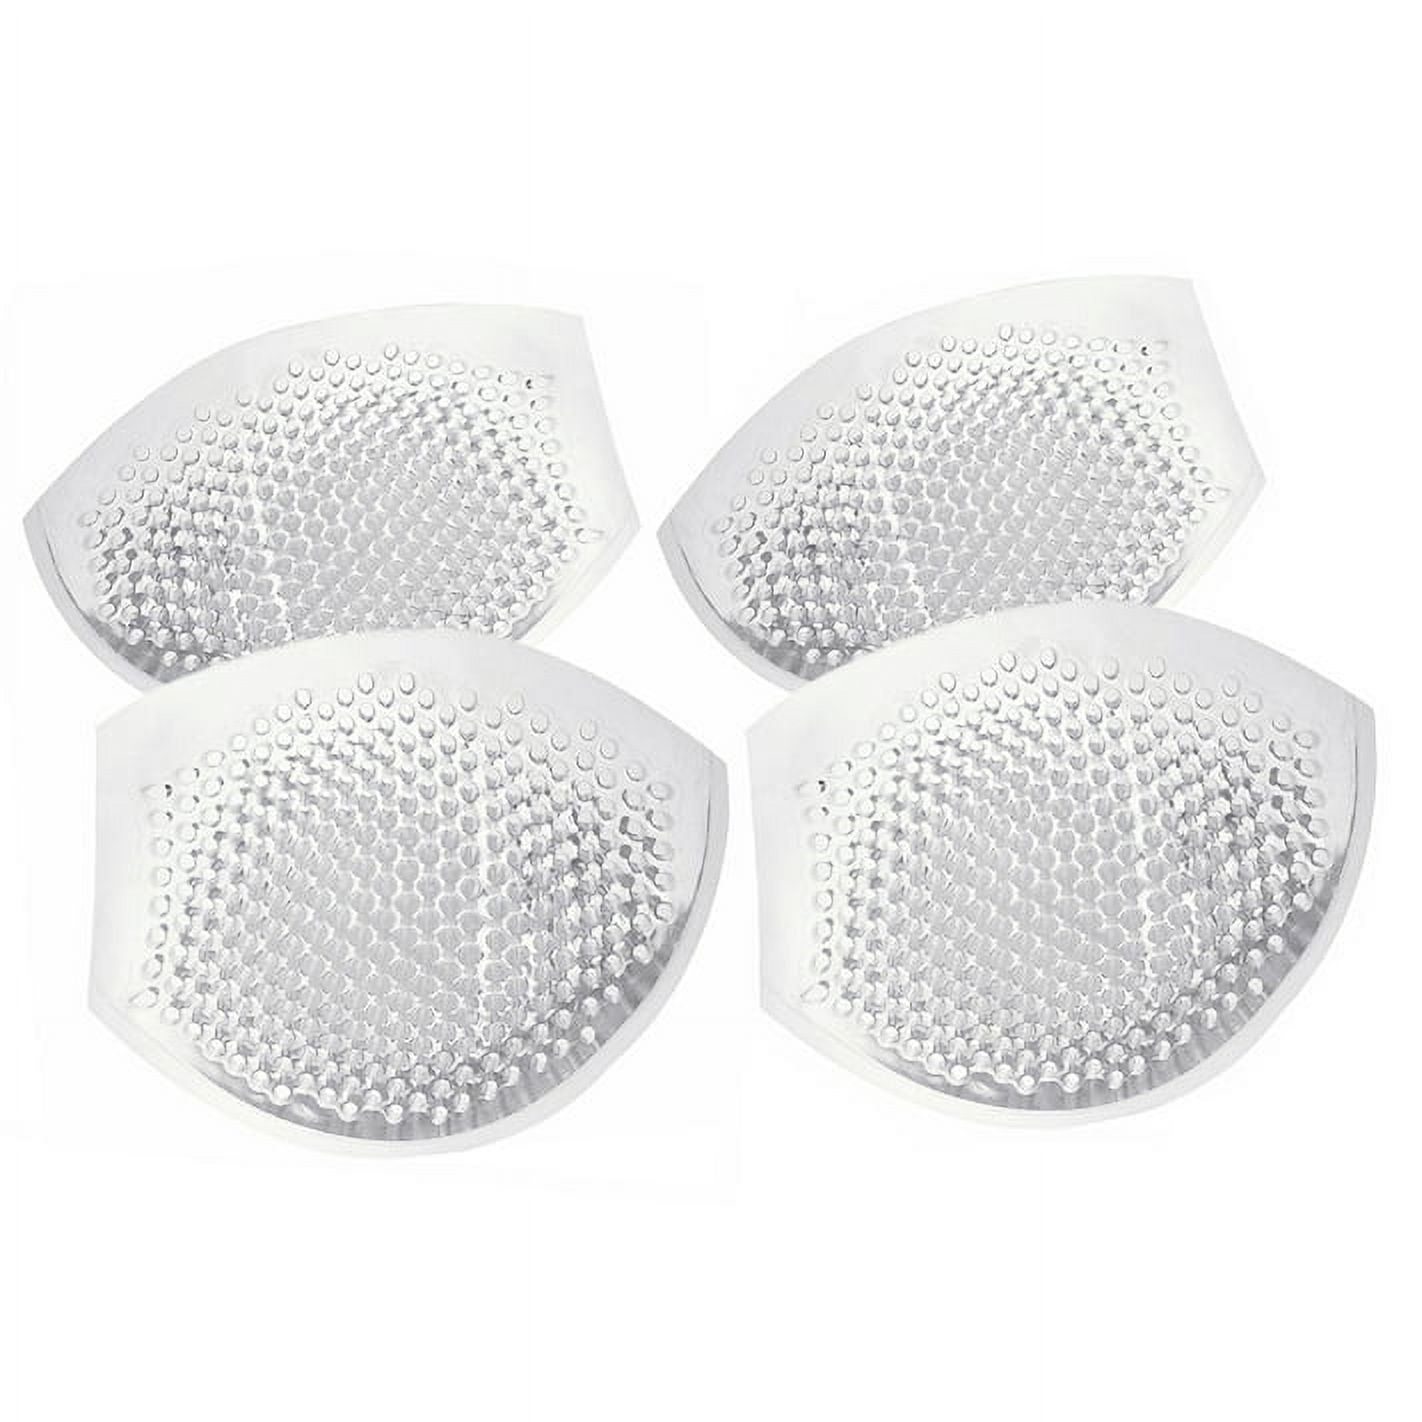 2 Pcs Socking Stuffers Silicone Breast Enhancers Bra Pads Silicone